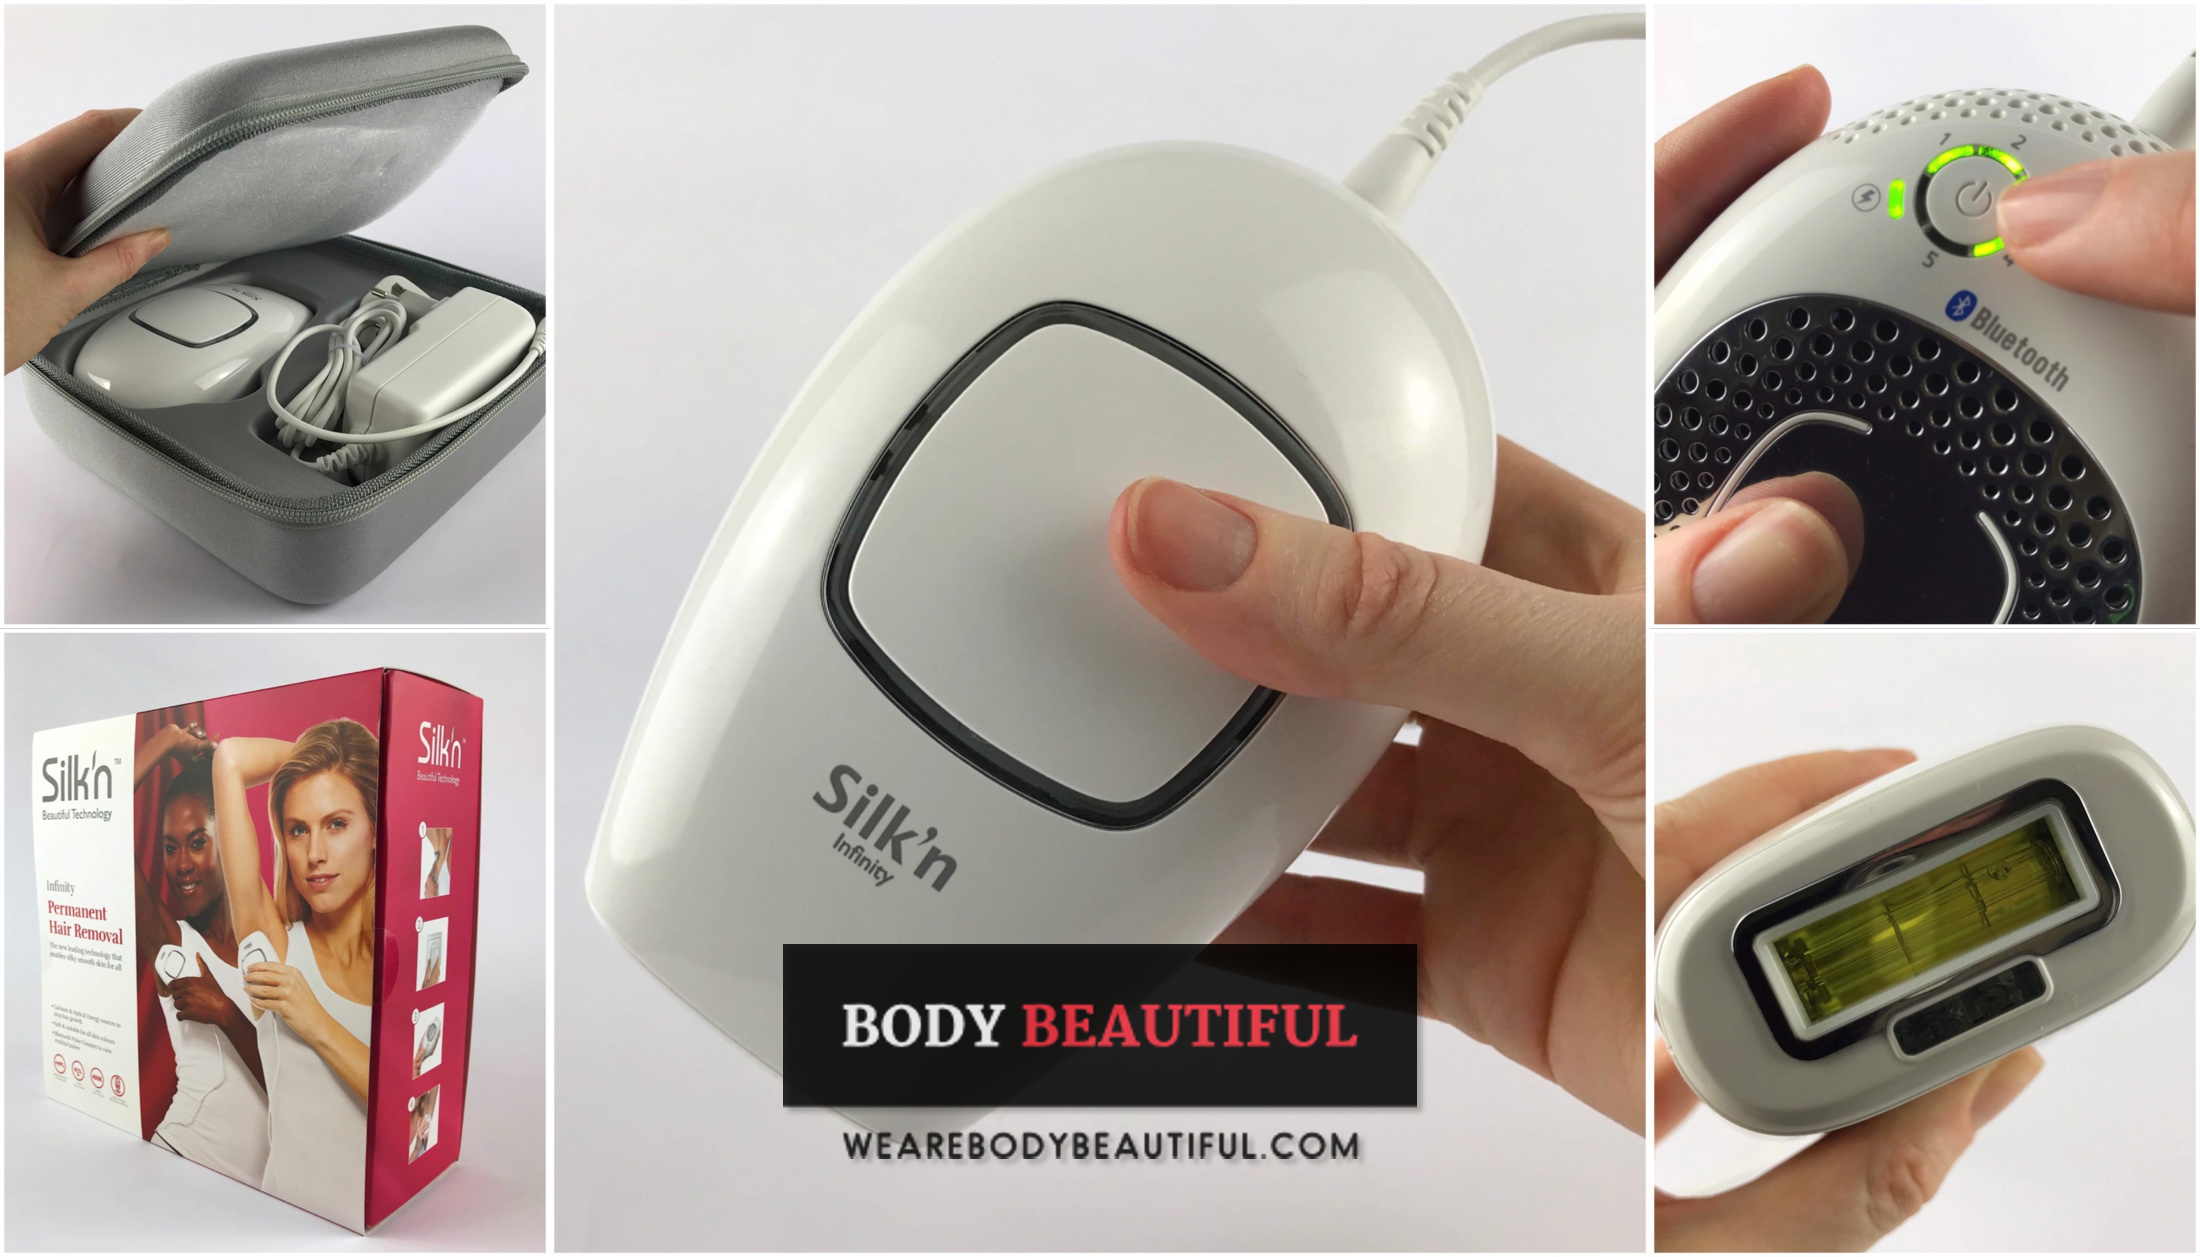 Silk'n Infinity Hair Removal Device - wide 3